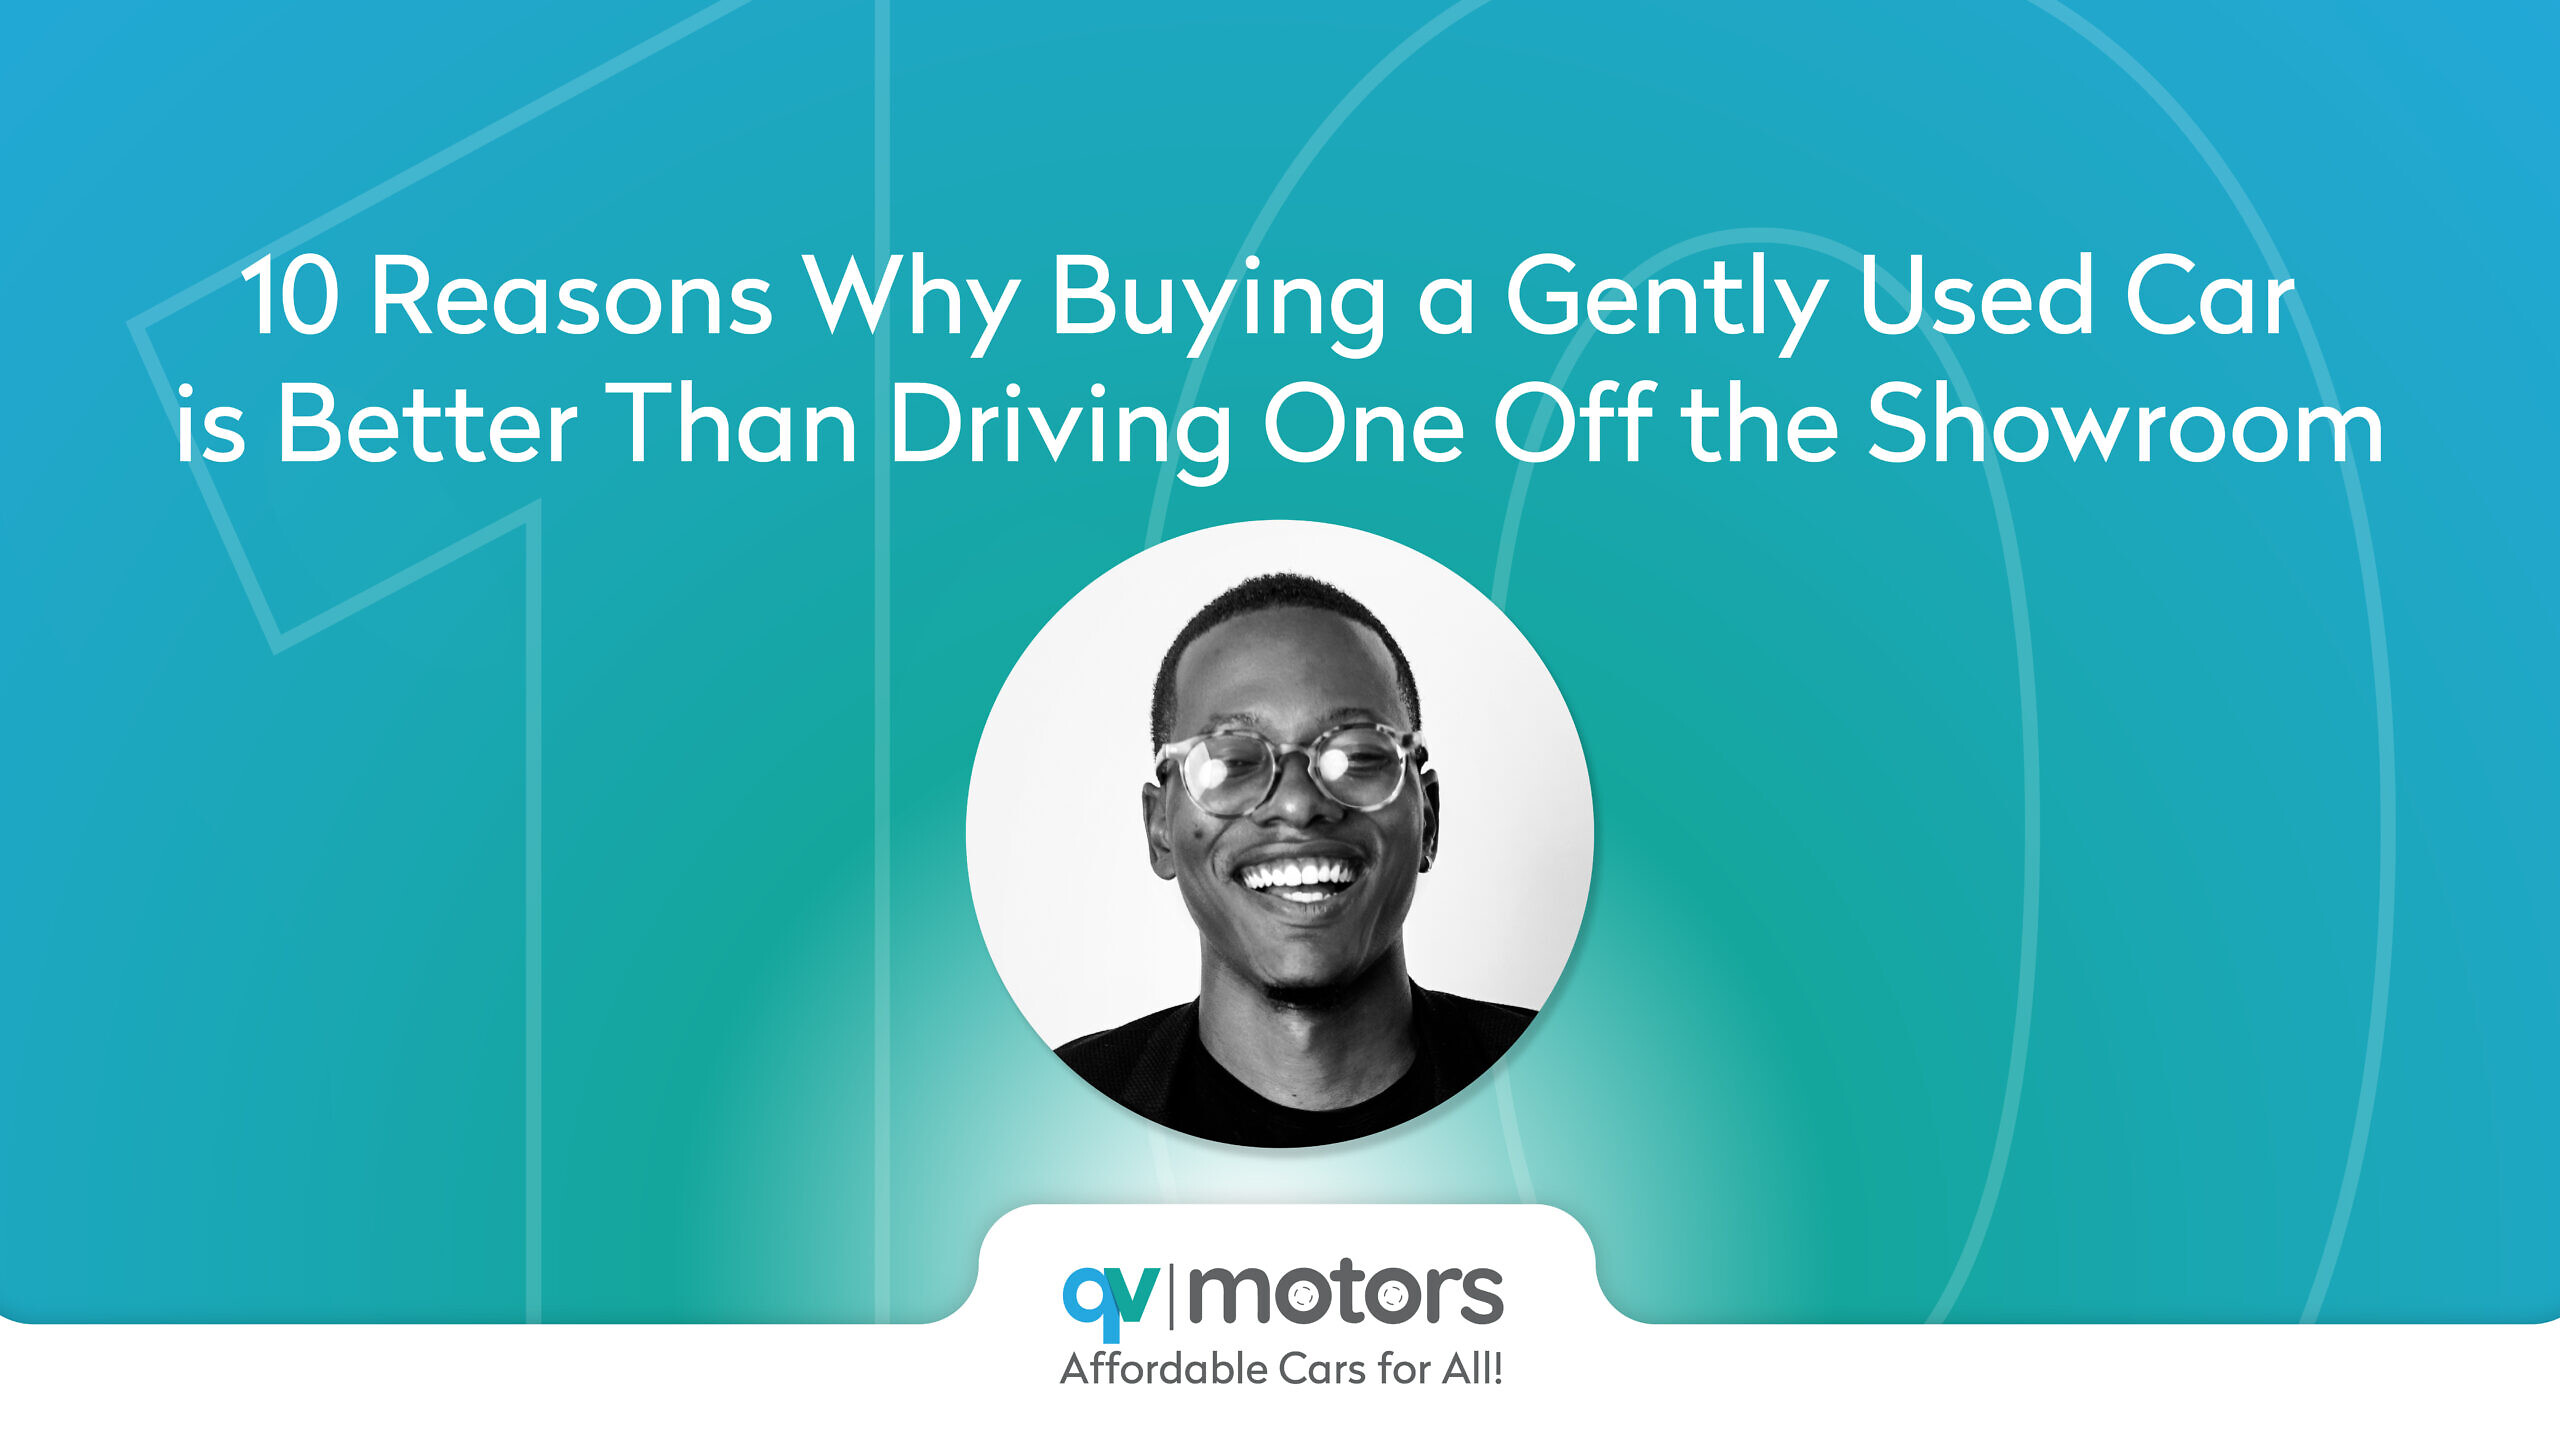 10 Reasons Why Buying a Gently Used Car is Better Than Driving One Off the Showroom